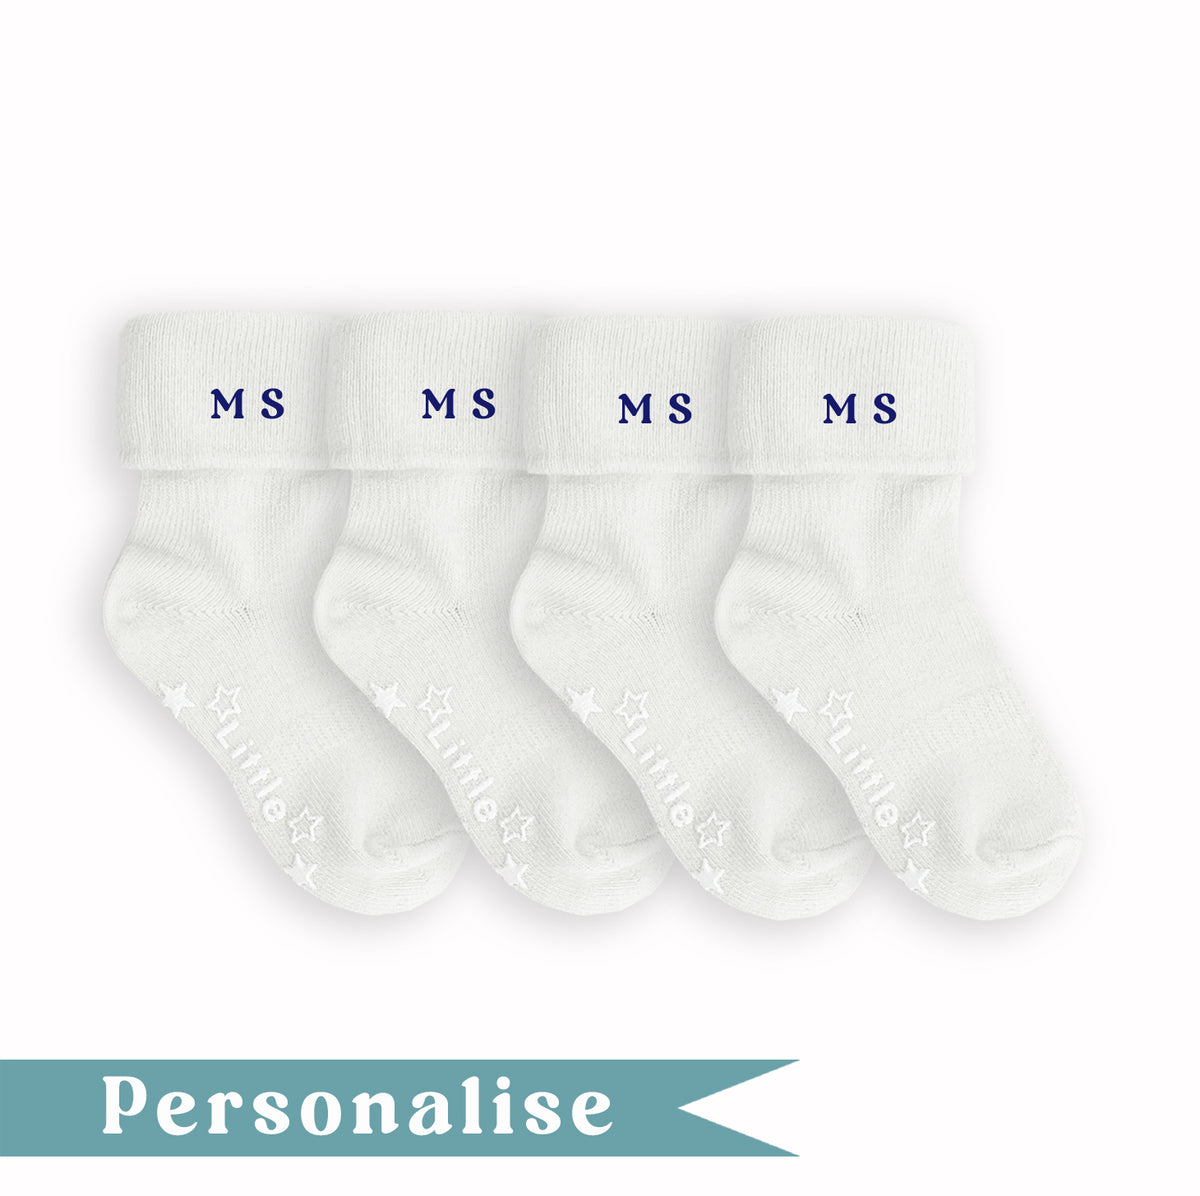 Personalised set of Multi-award winning Non-Slip Stay on Baby and Toddler Socks - White - 0-3 years